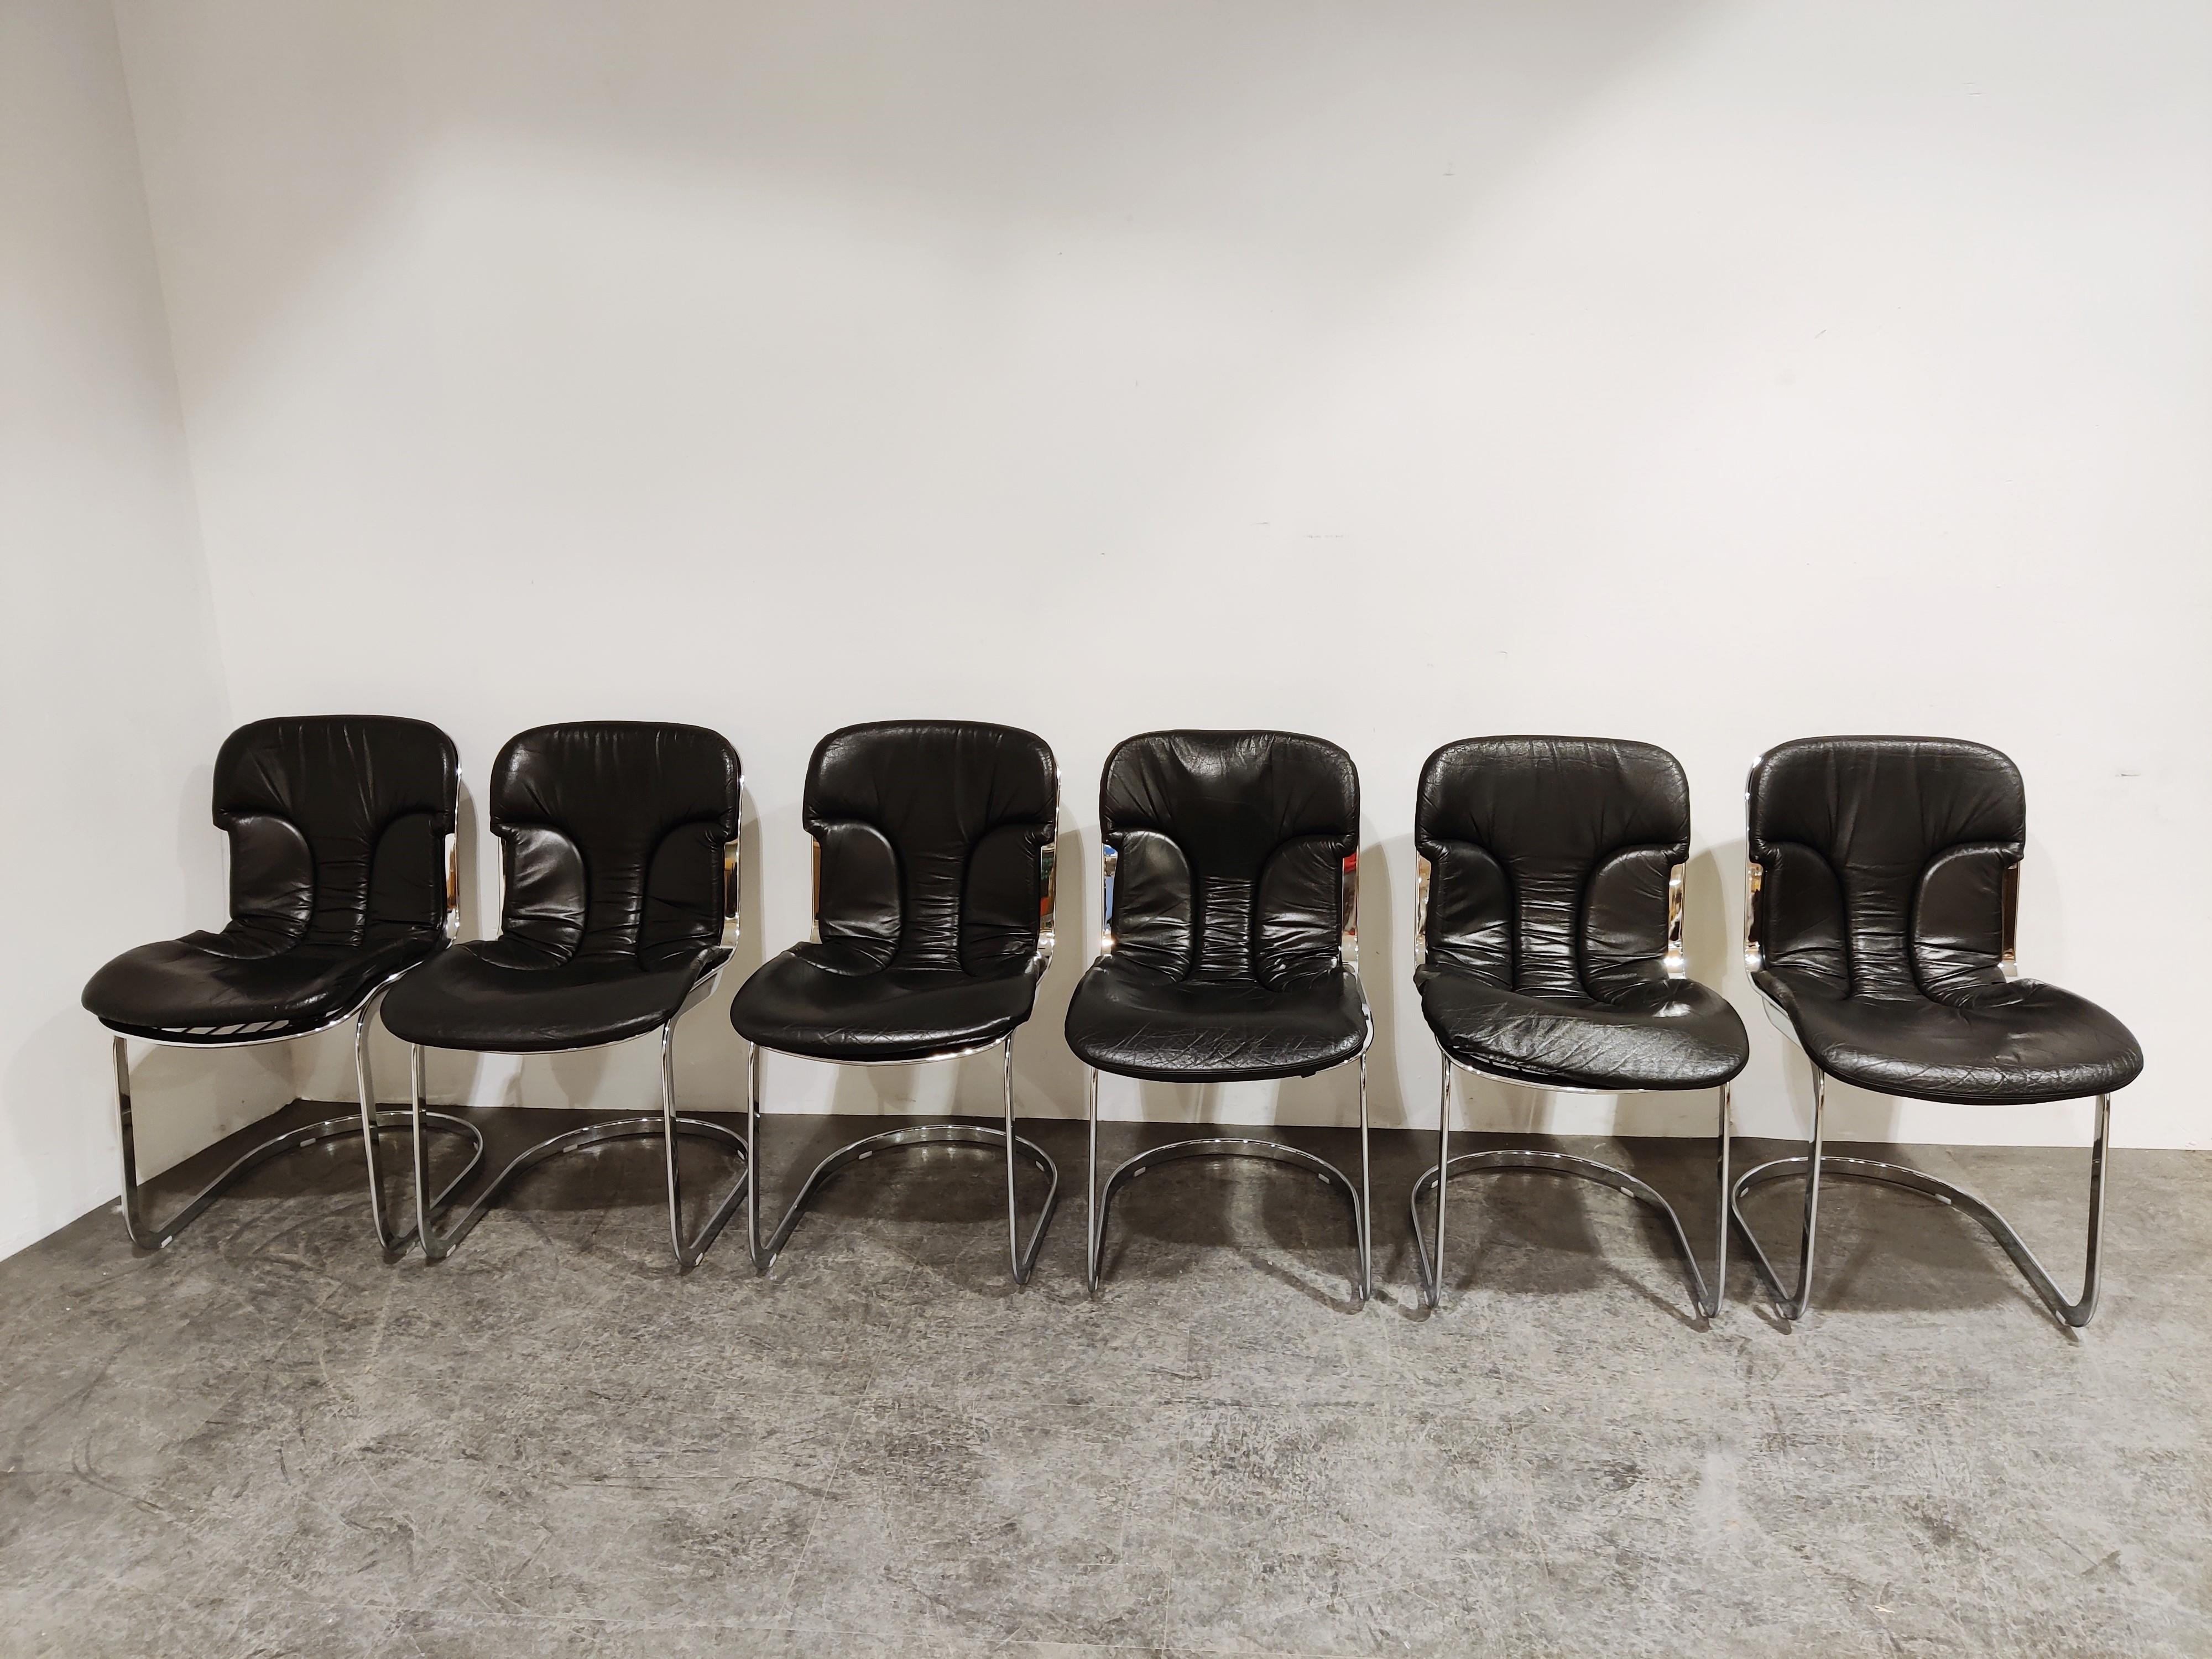 Set of 6 dining chairs designed by Willy Rizzo for Cidue.

The chairs have a beautifully shaped chrome frame and come with the original black leather seats.

Very good condition.

This is a rare model.

The chairs still look up to date in